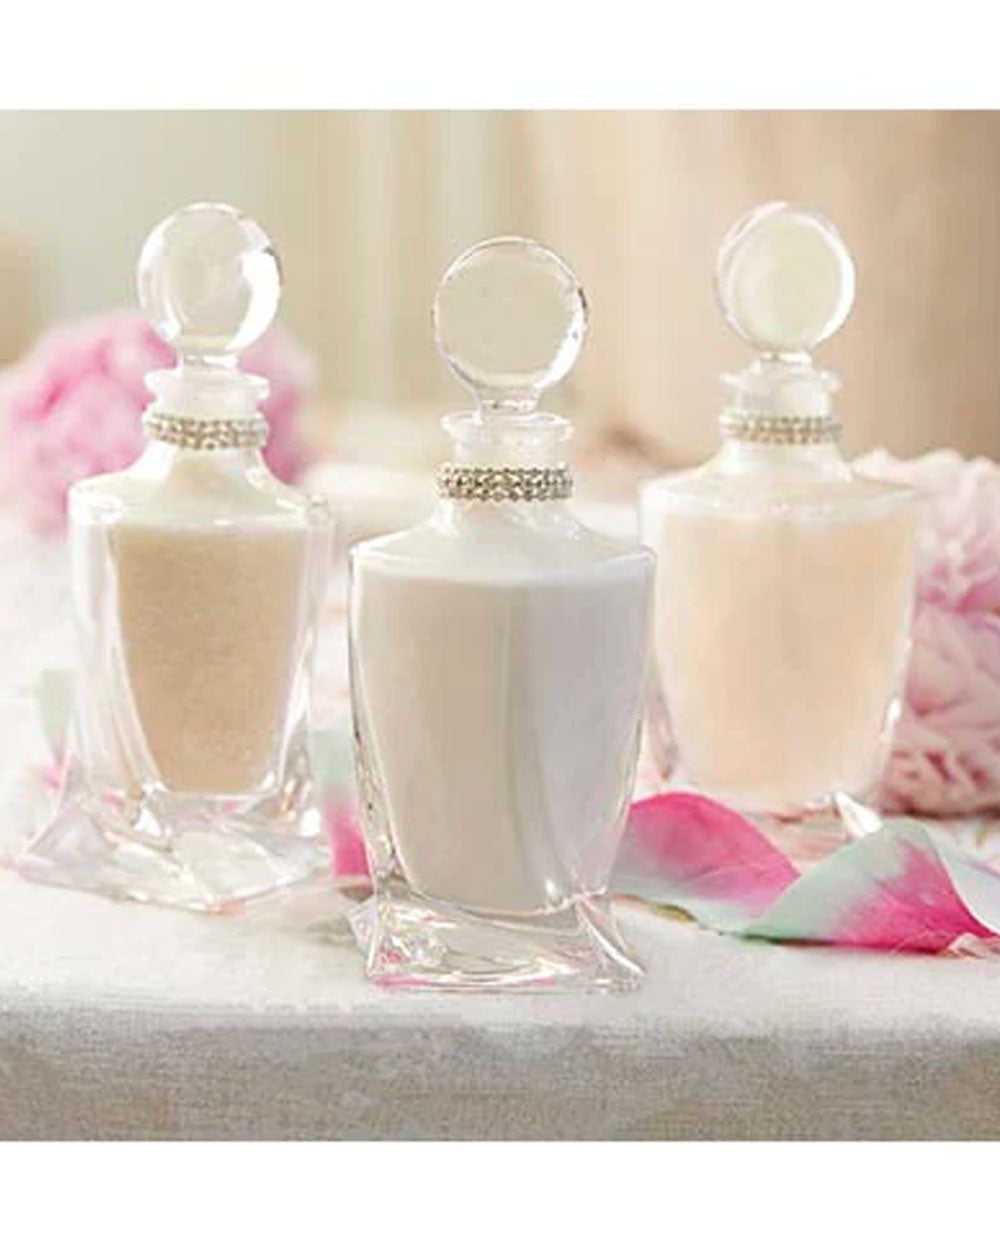 Tryst Lotion Petite Decanter